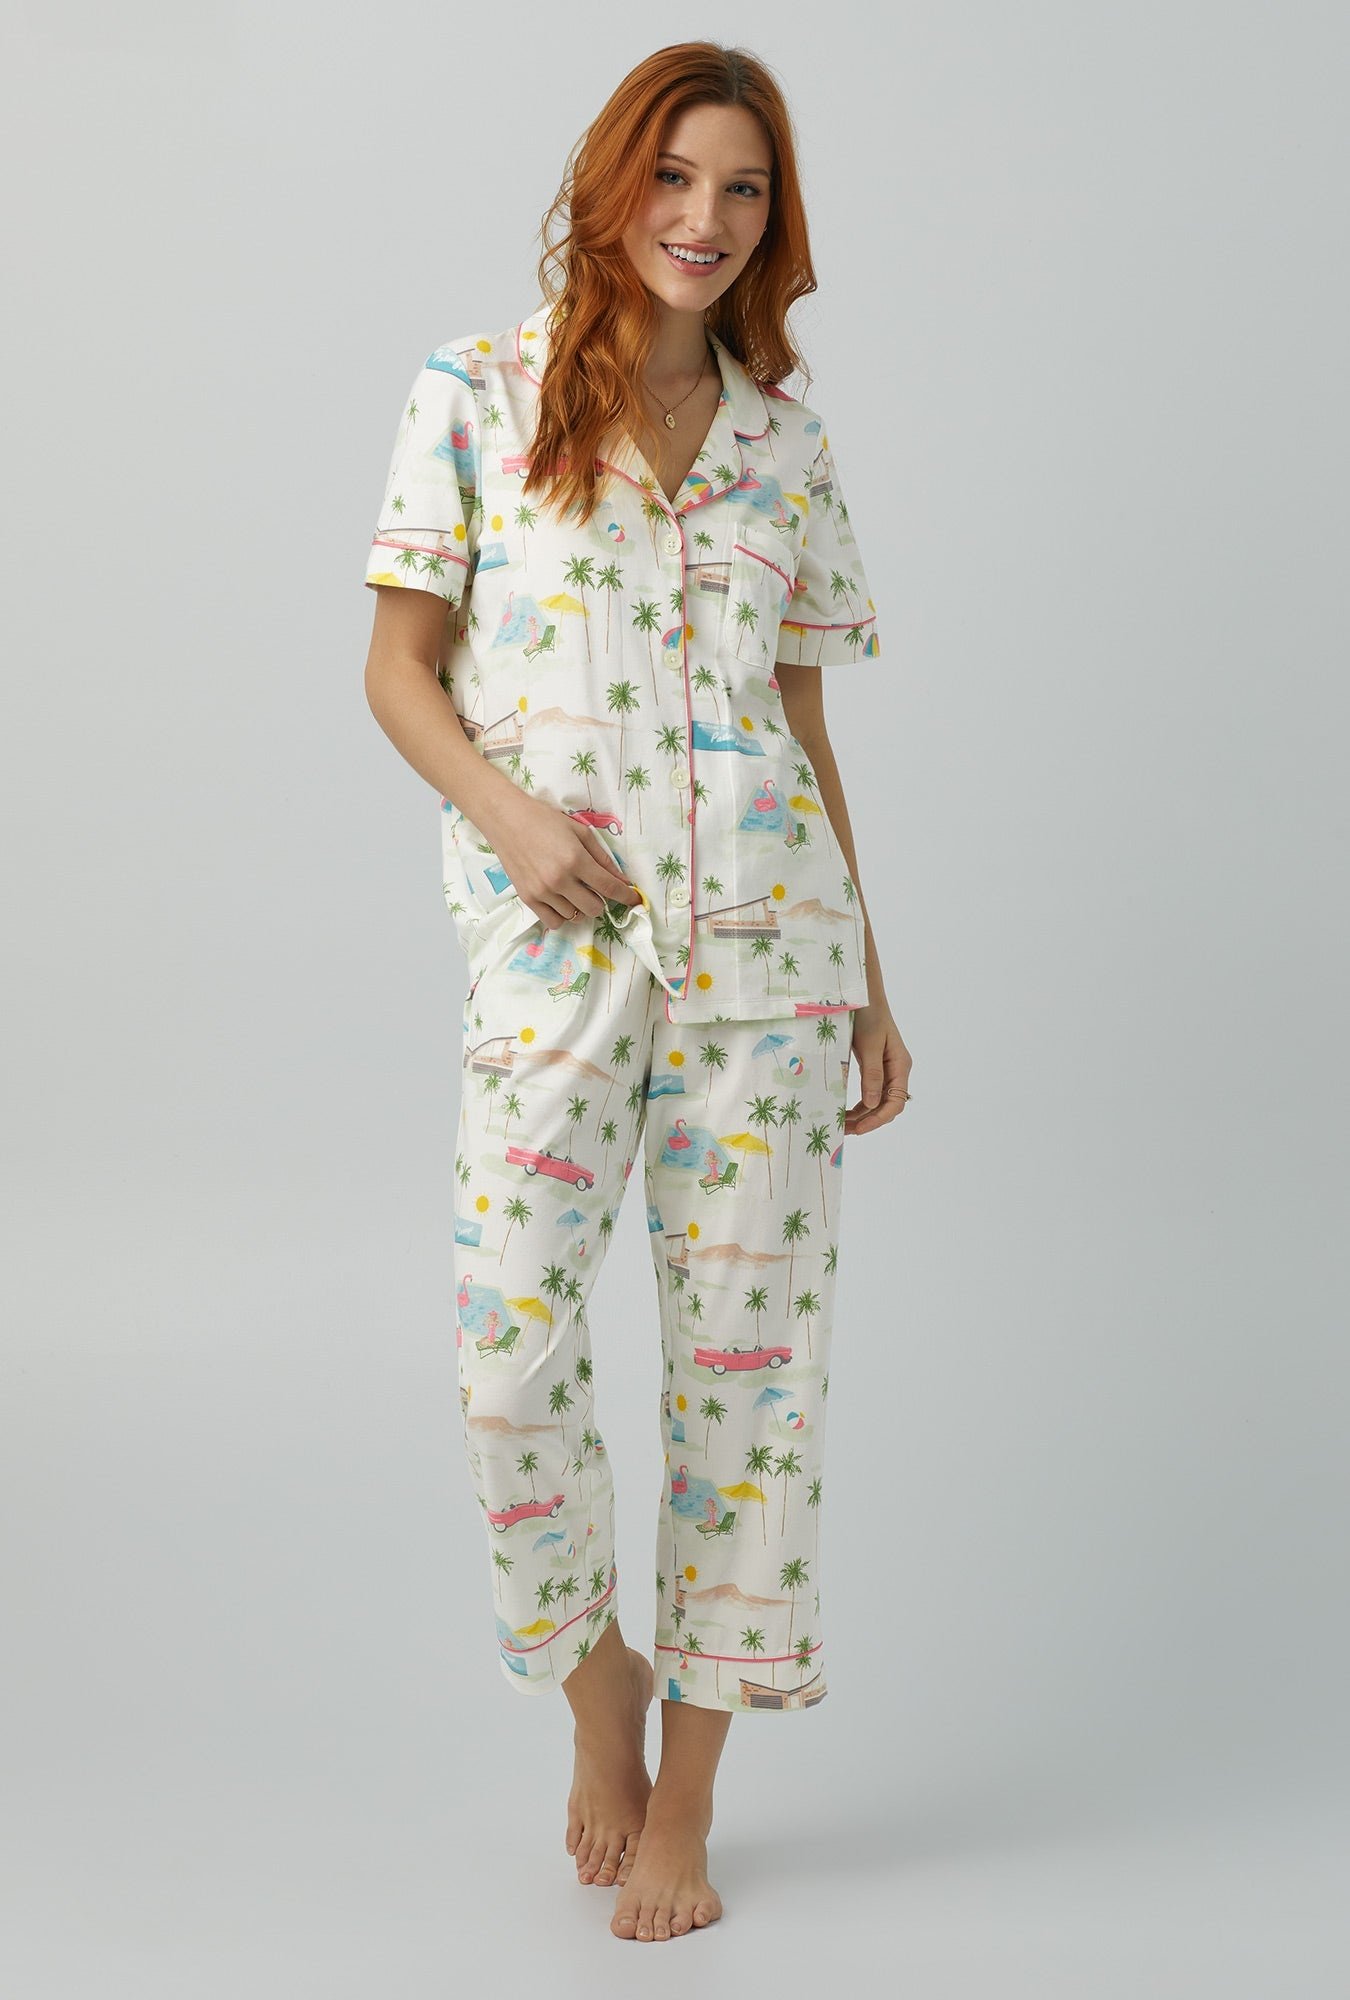 Bed Head BH270003 Palm Springs SS Cropped Classic Stretch PJ Set